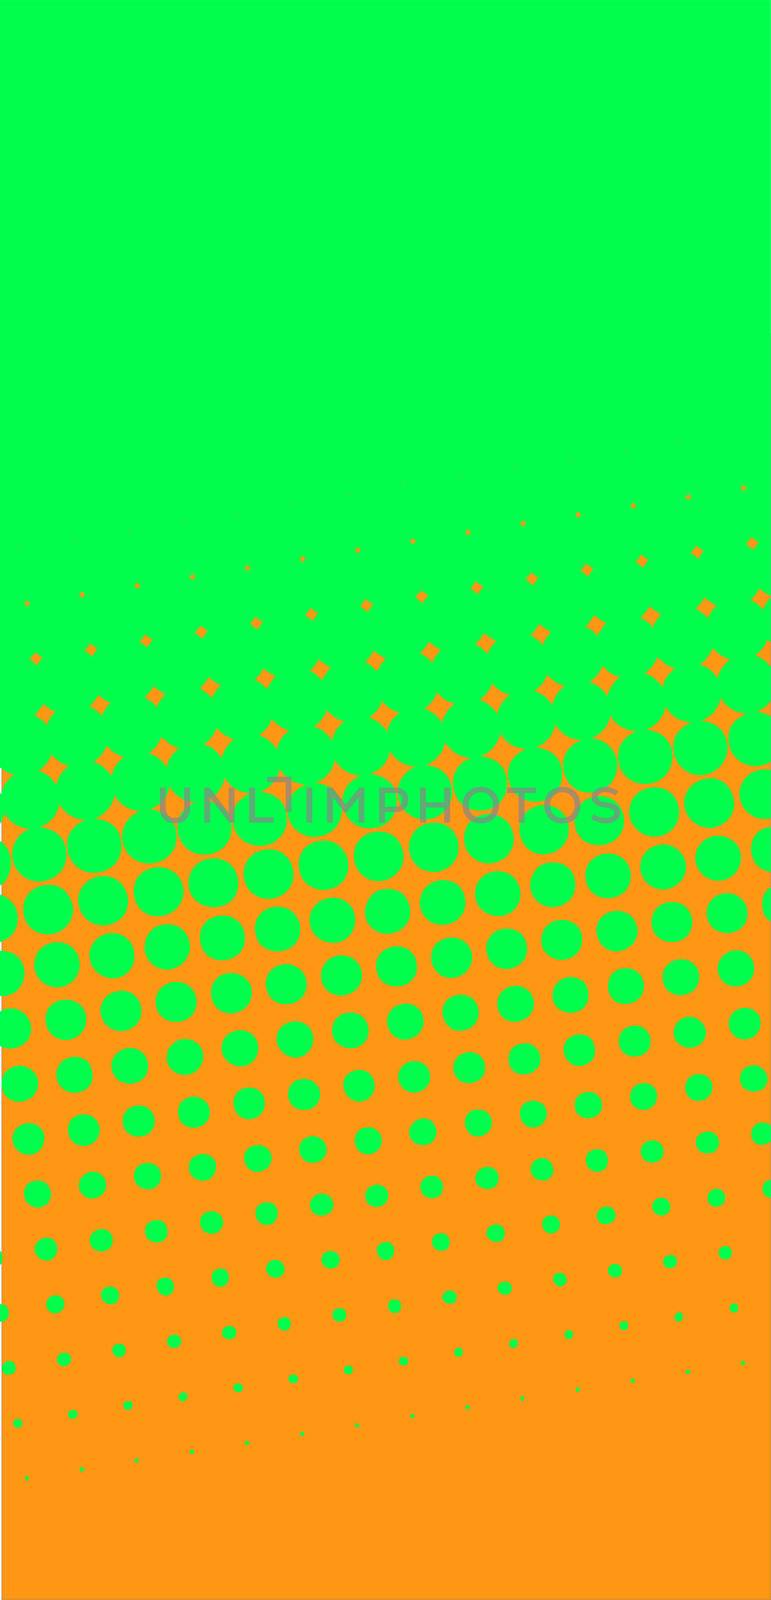 80's Revival Halftone Gradient by jeremywhat